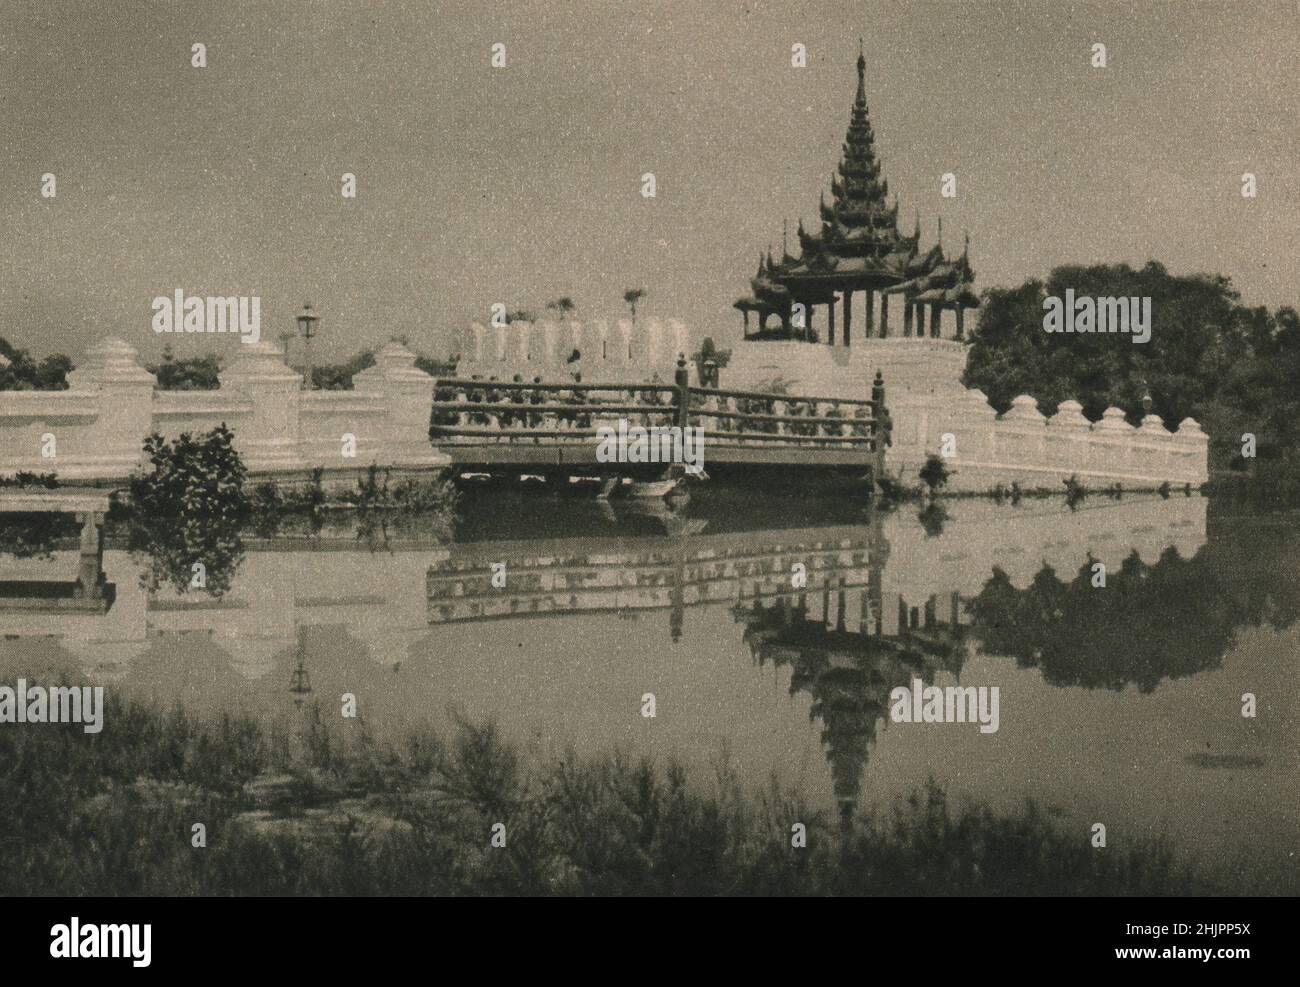 Five graceful bridges across the moat that thus beautifully reflects them give access to Fort Dufferin, the old city of Mandalay. Burma (1923) Stock Photo